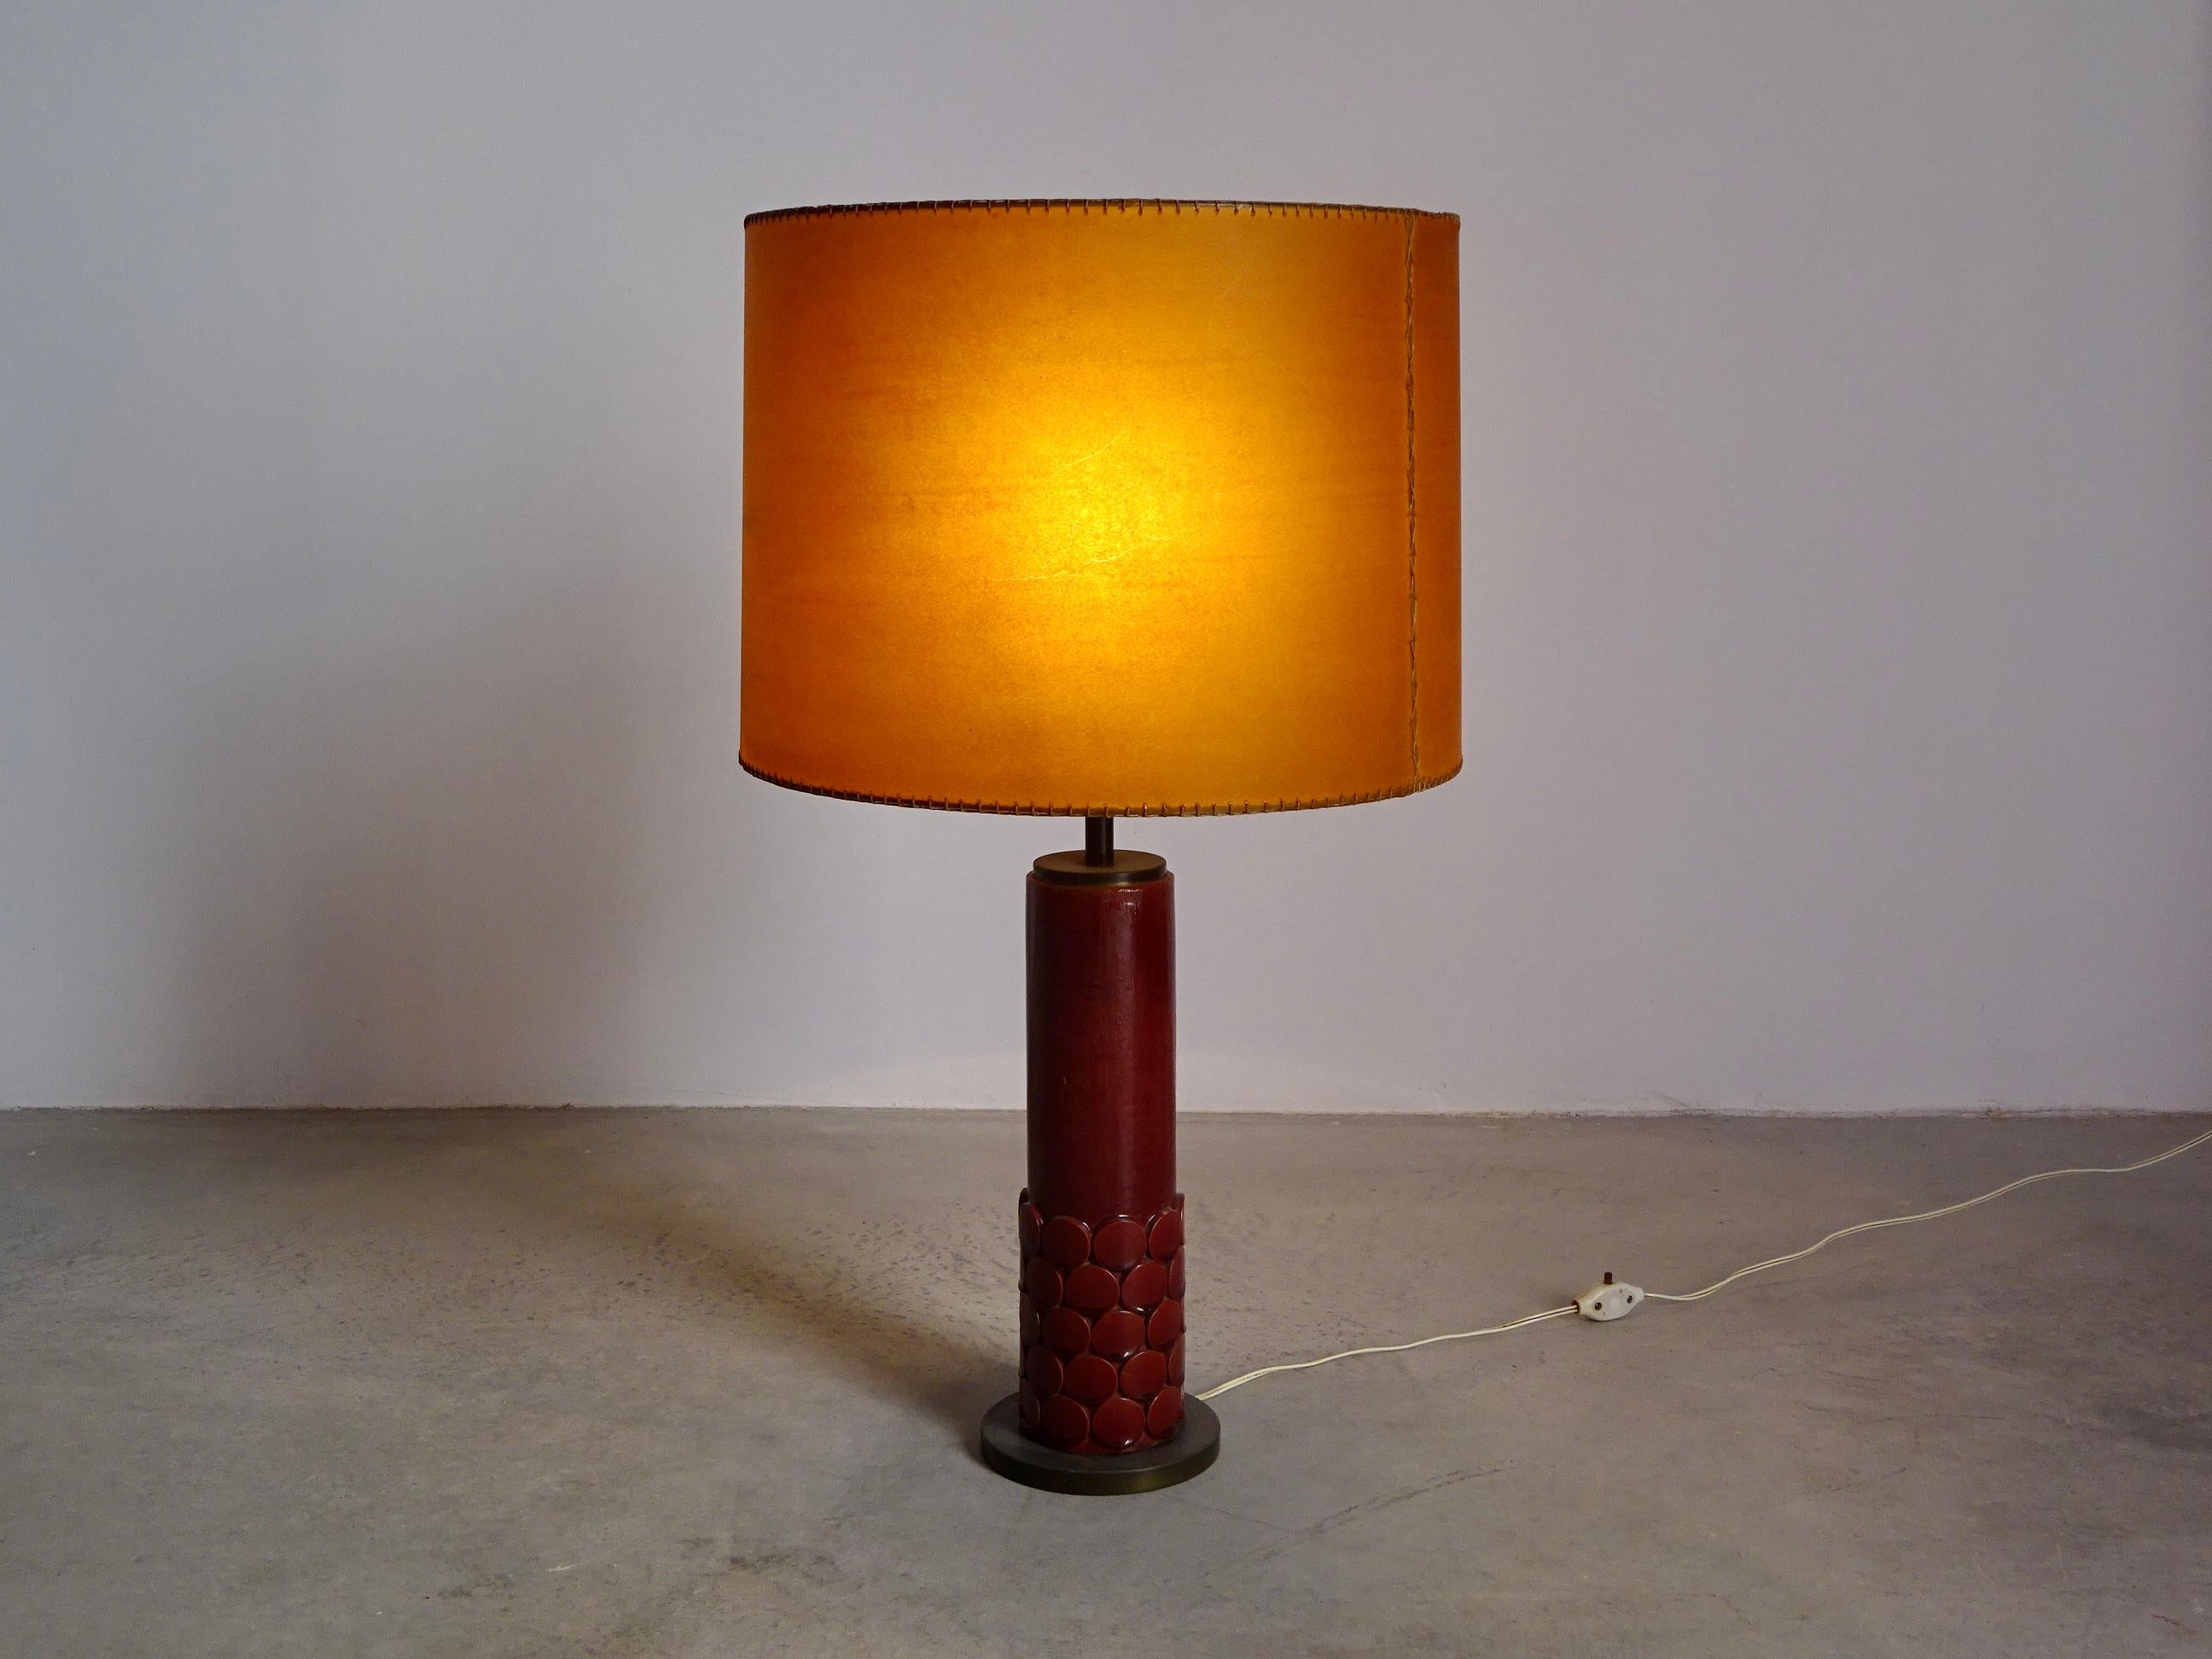 Table lamp designed in 1973 by Jordi Vilanova i Bosch in brass base, ceramic by Jordi Aguadé and lamp shade in leather sewn. The lamp has a beautiful patina, ready to use. Jordi Vilanova (1925-1988) worked intensively on the creation of modern